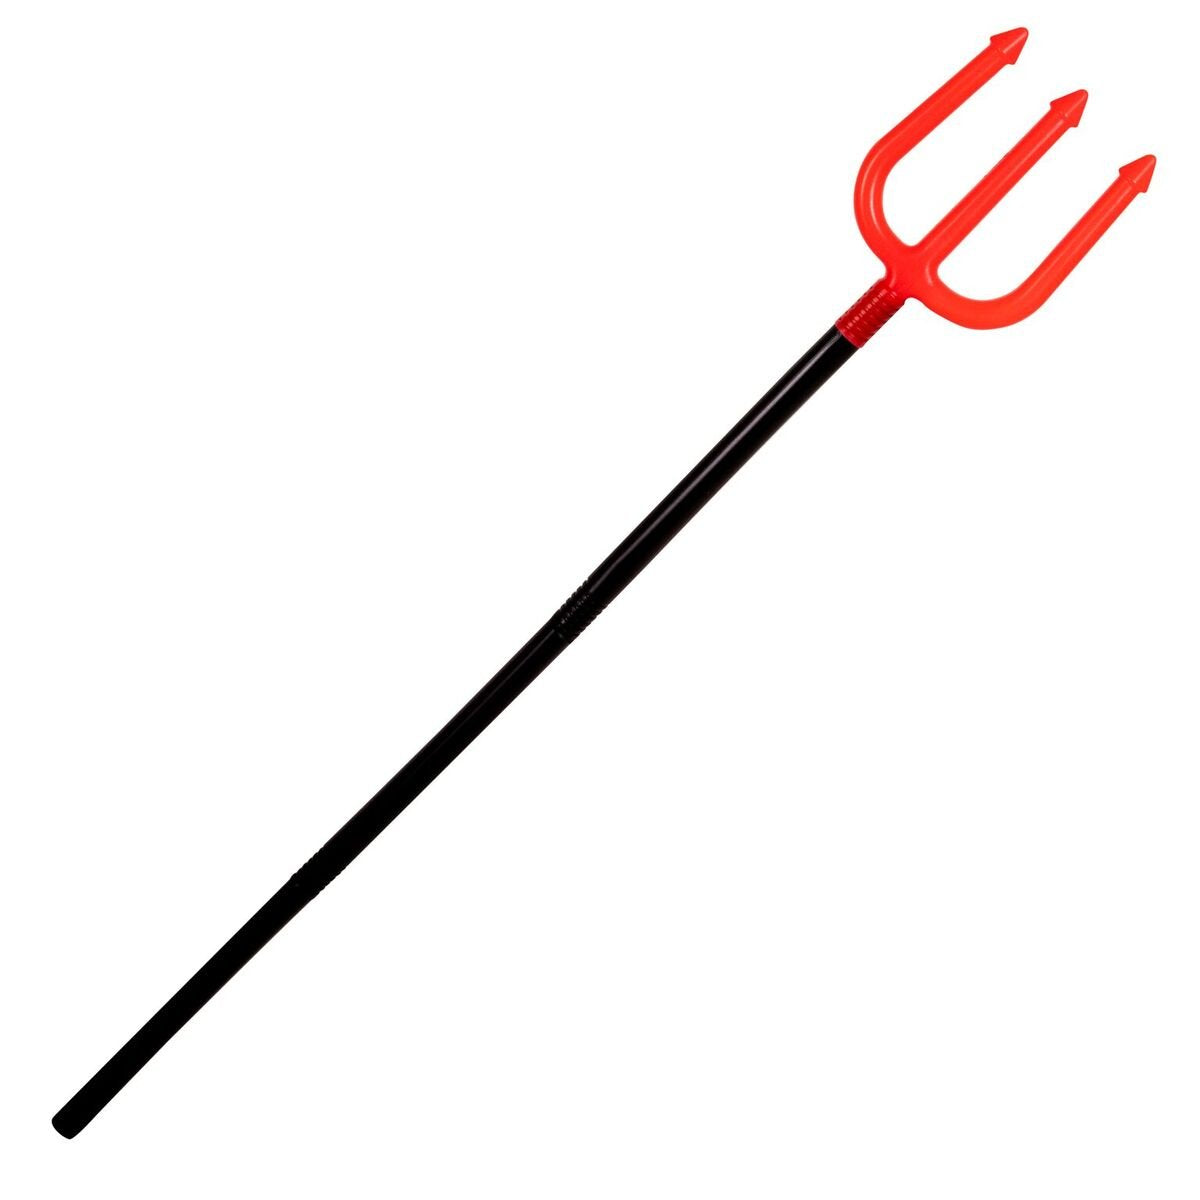 Kangaroo Costumes; Devil's Pitchfork with Handle, 44.25" Red